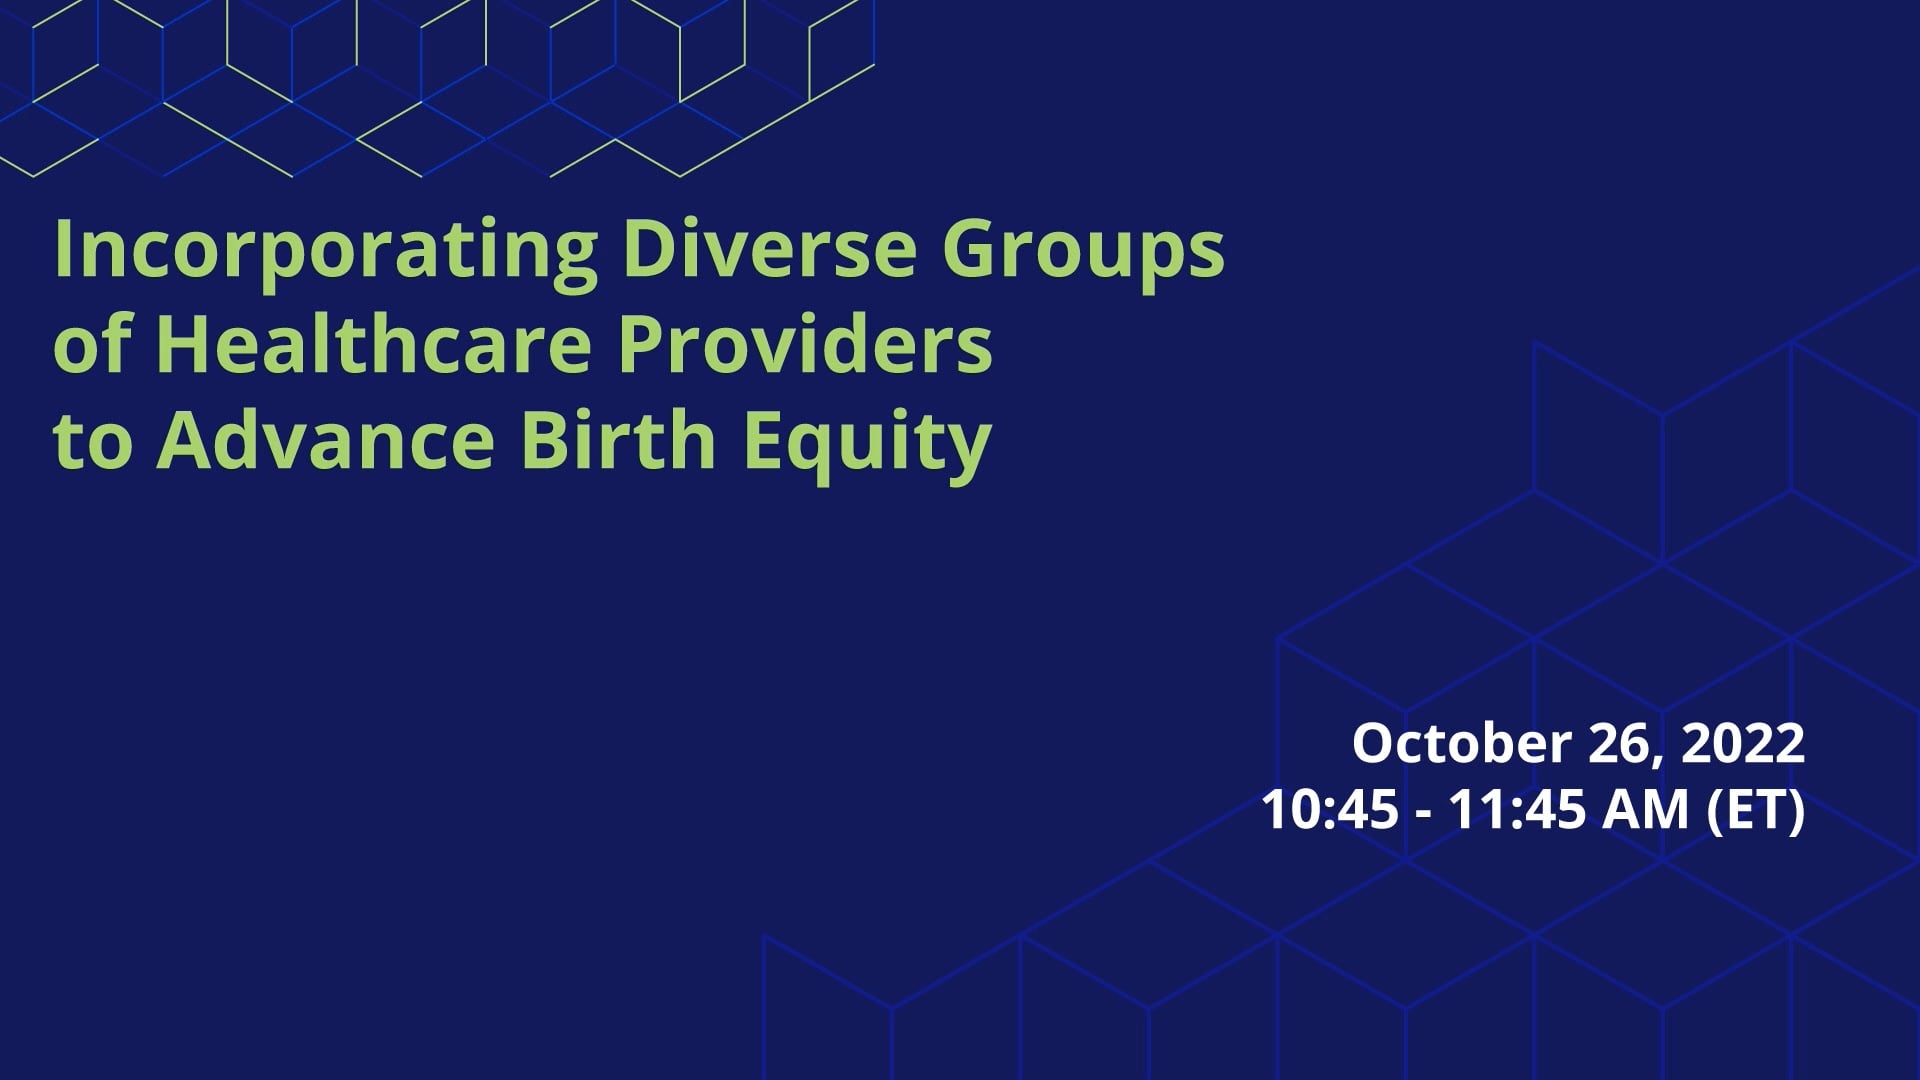 2022 PCORI Annual Meeting Incorporating Diverse Groups of Healthcare